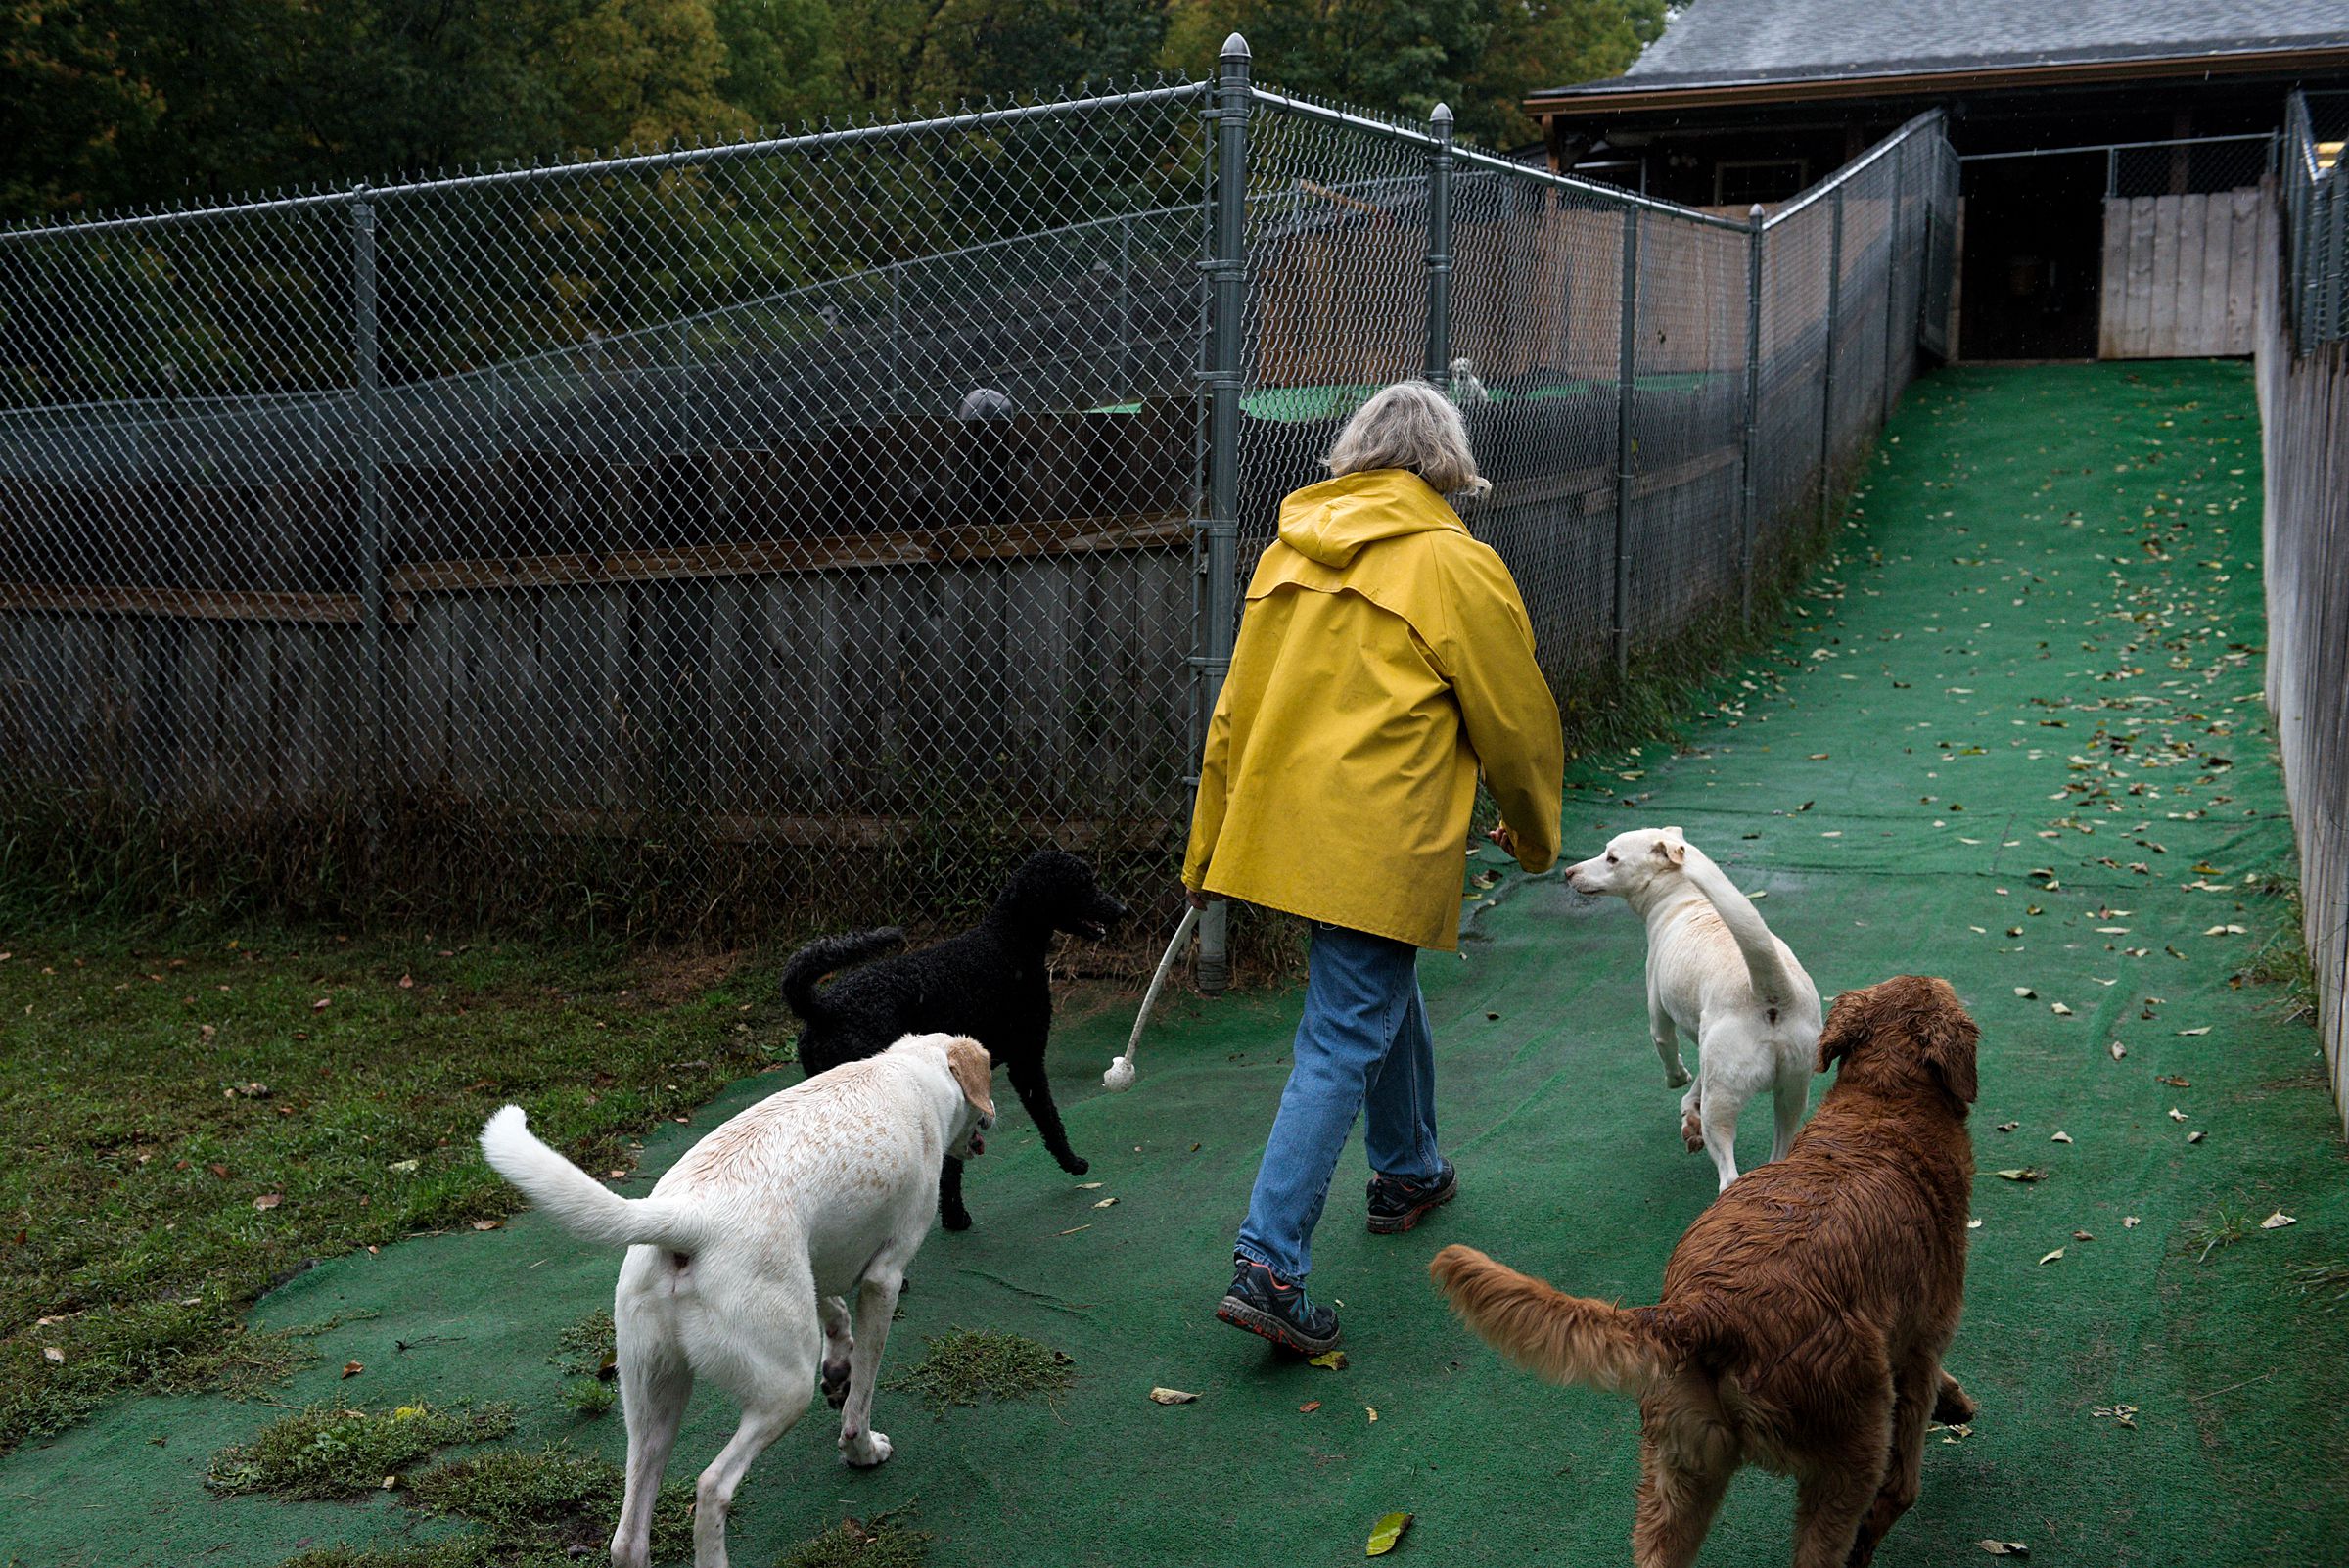 Mary Blain, of Canaan, retreats from the rain after playing fetch with several dogs at Mountain View Pet Resort, a dog boarding and daycare center in Canaan, N.H., Thursday, Sept. 26, 2019. Blain tries to keep the dogs active with two, two-hour play sessions during the day so they go home tired.(Valley News - James M. Patterson) Copyright Valley News. May not be reprinted or used online without permission. Send requests to permission@vnews.com.